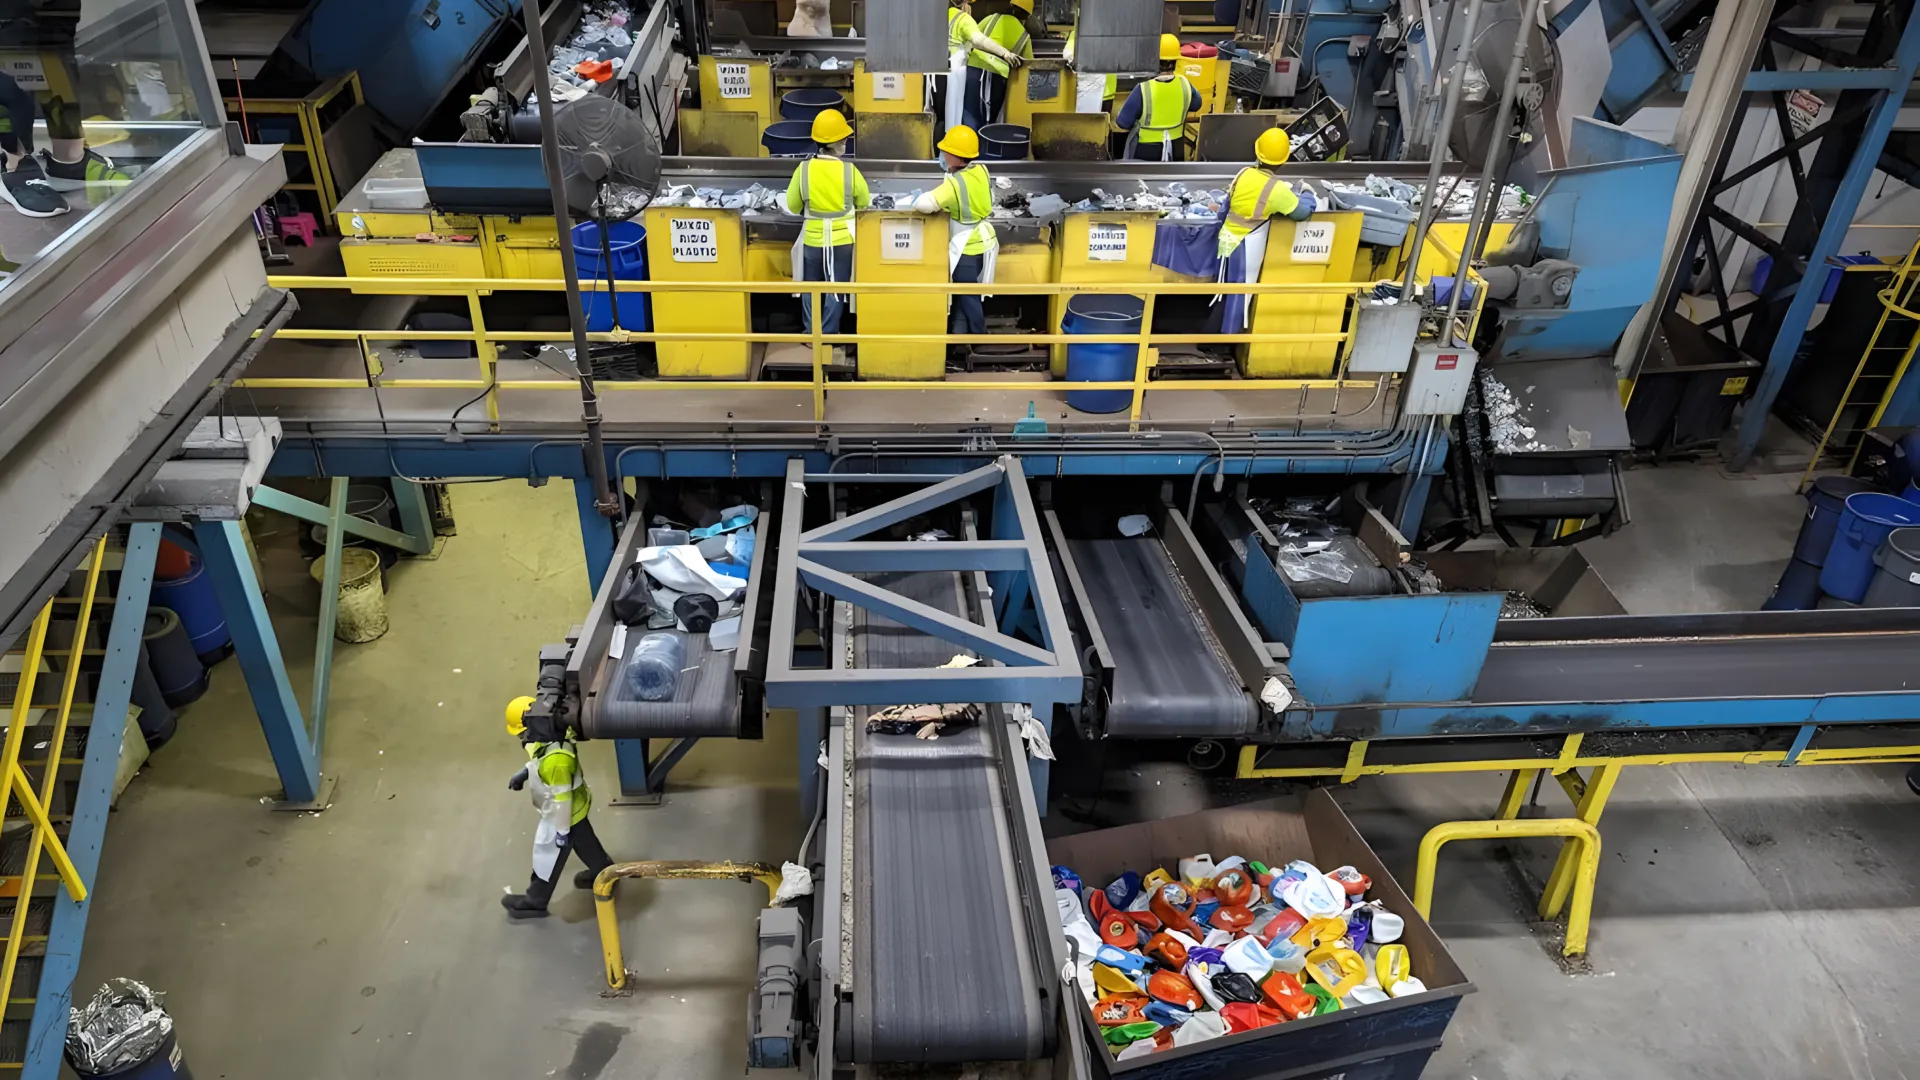 Workers at a recycling facility sort and separate recycled plasti